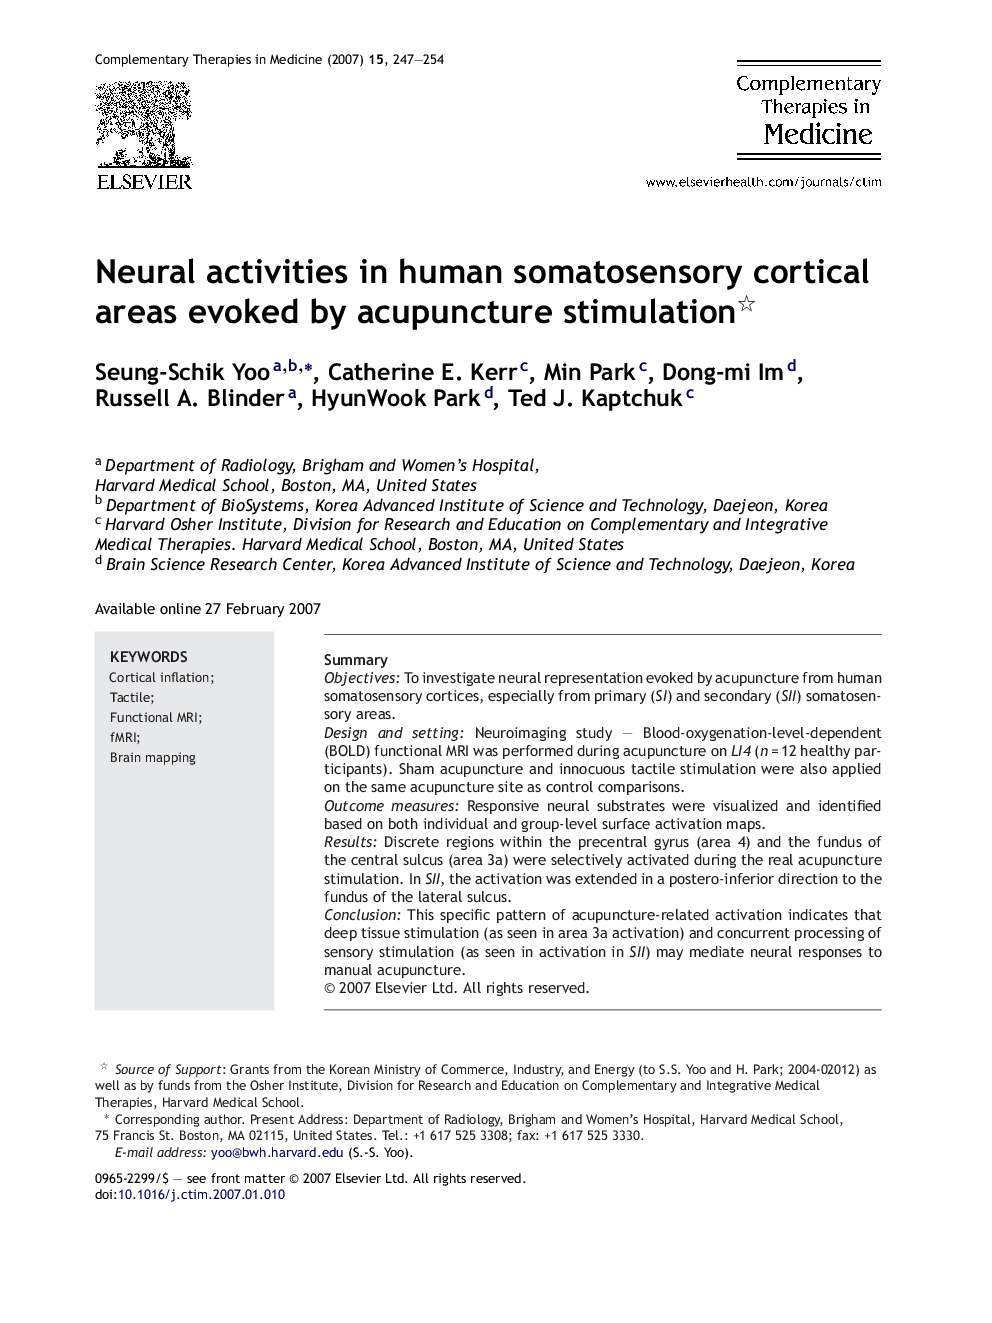 Neural activities in human somatosensory cortical areas evoked by acupuncture stimulation 